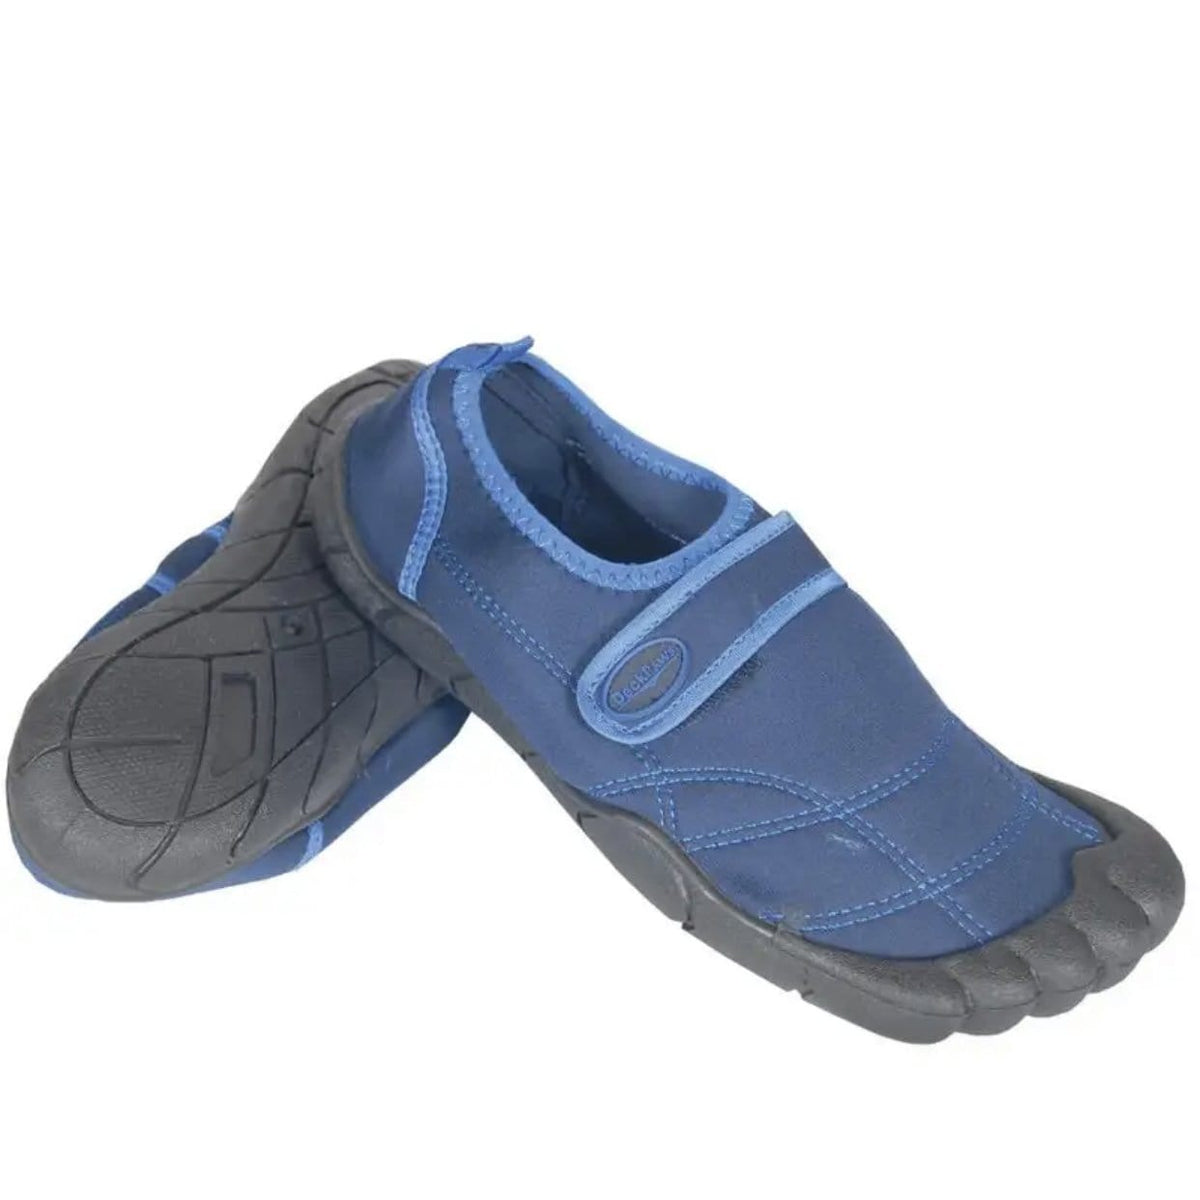 Best Water Shoes On  Under $30